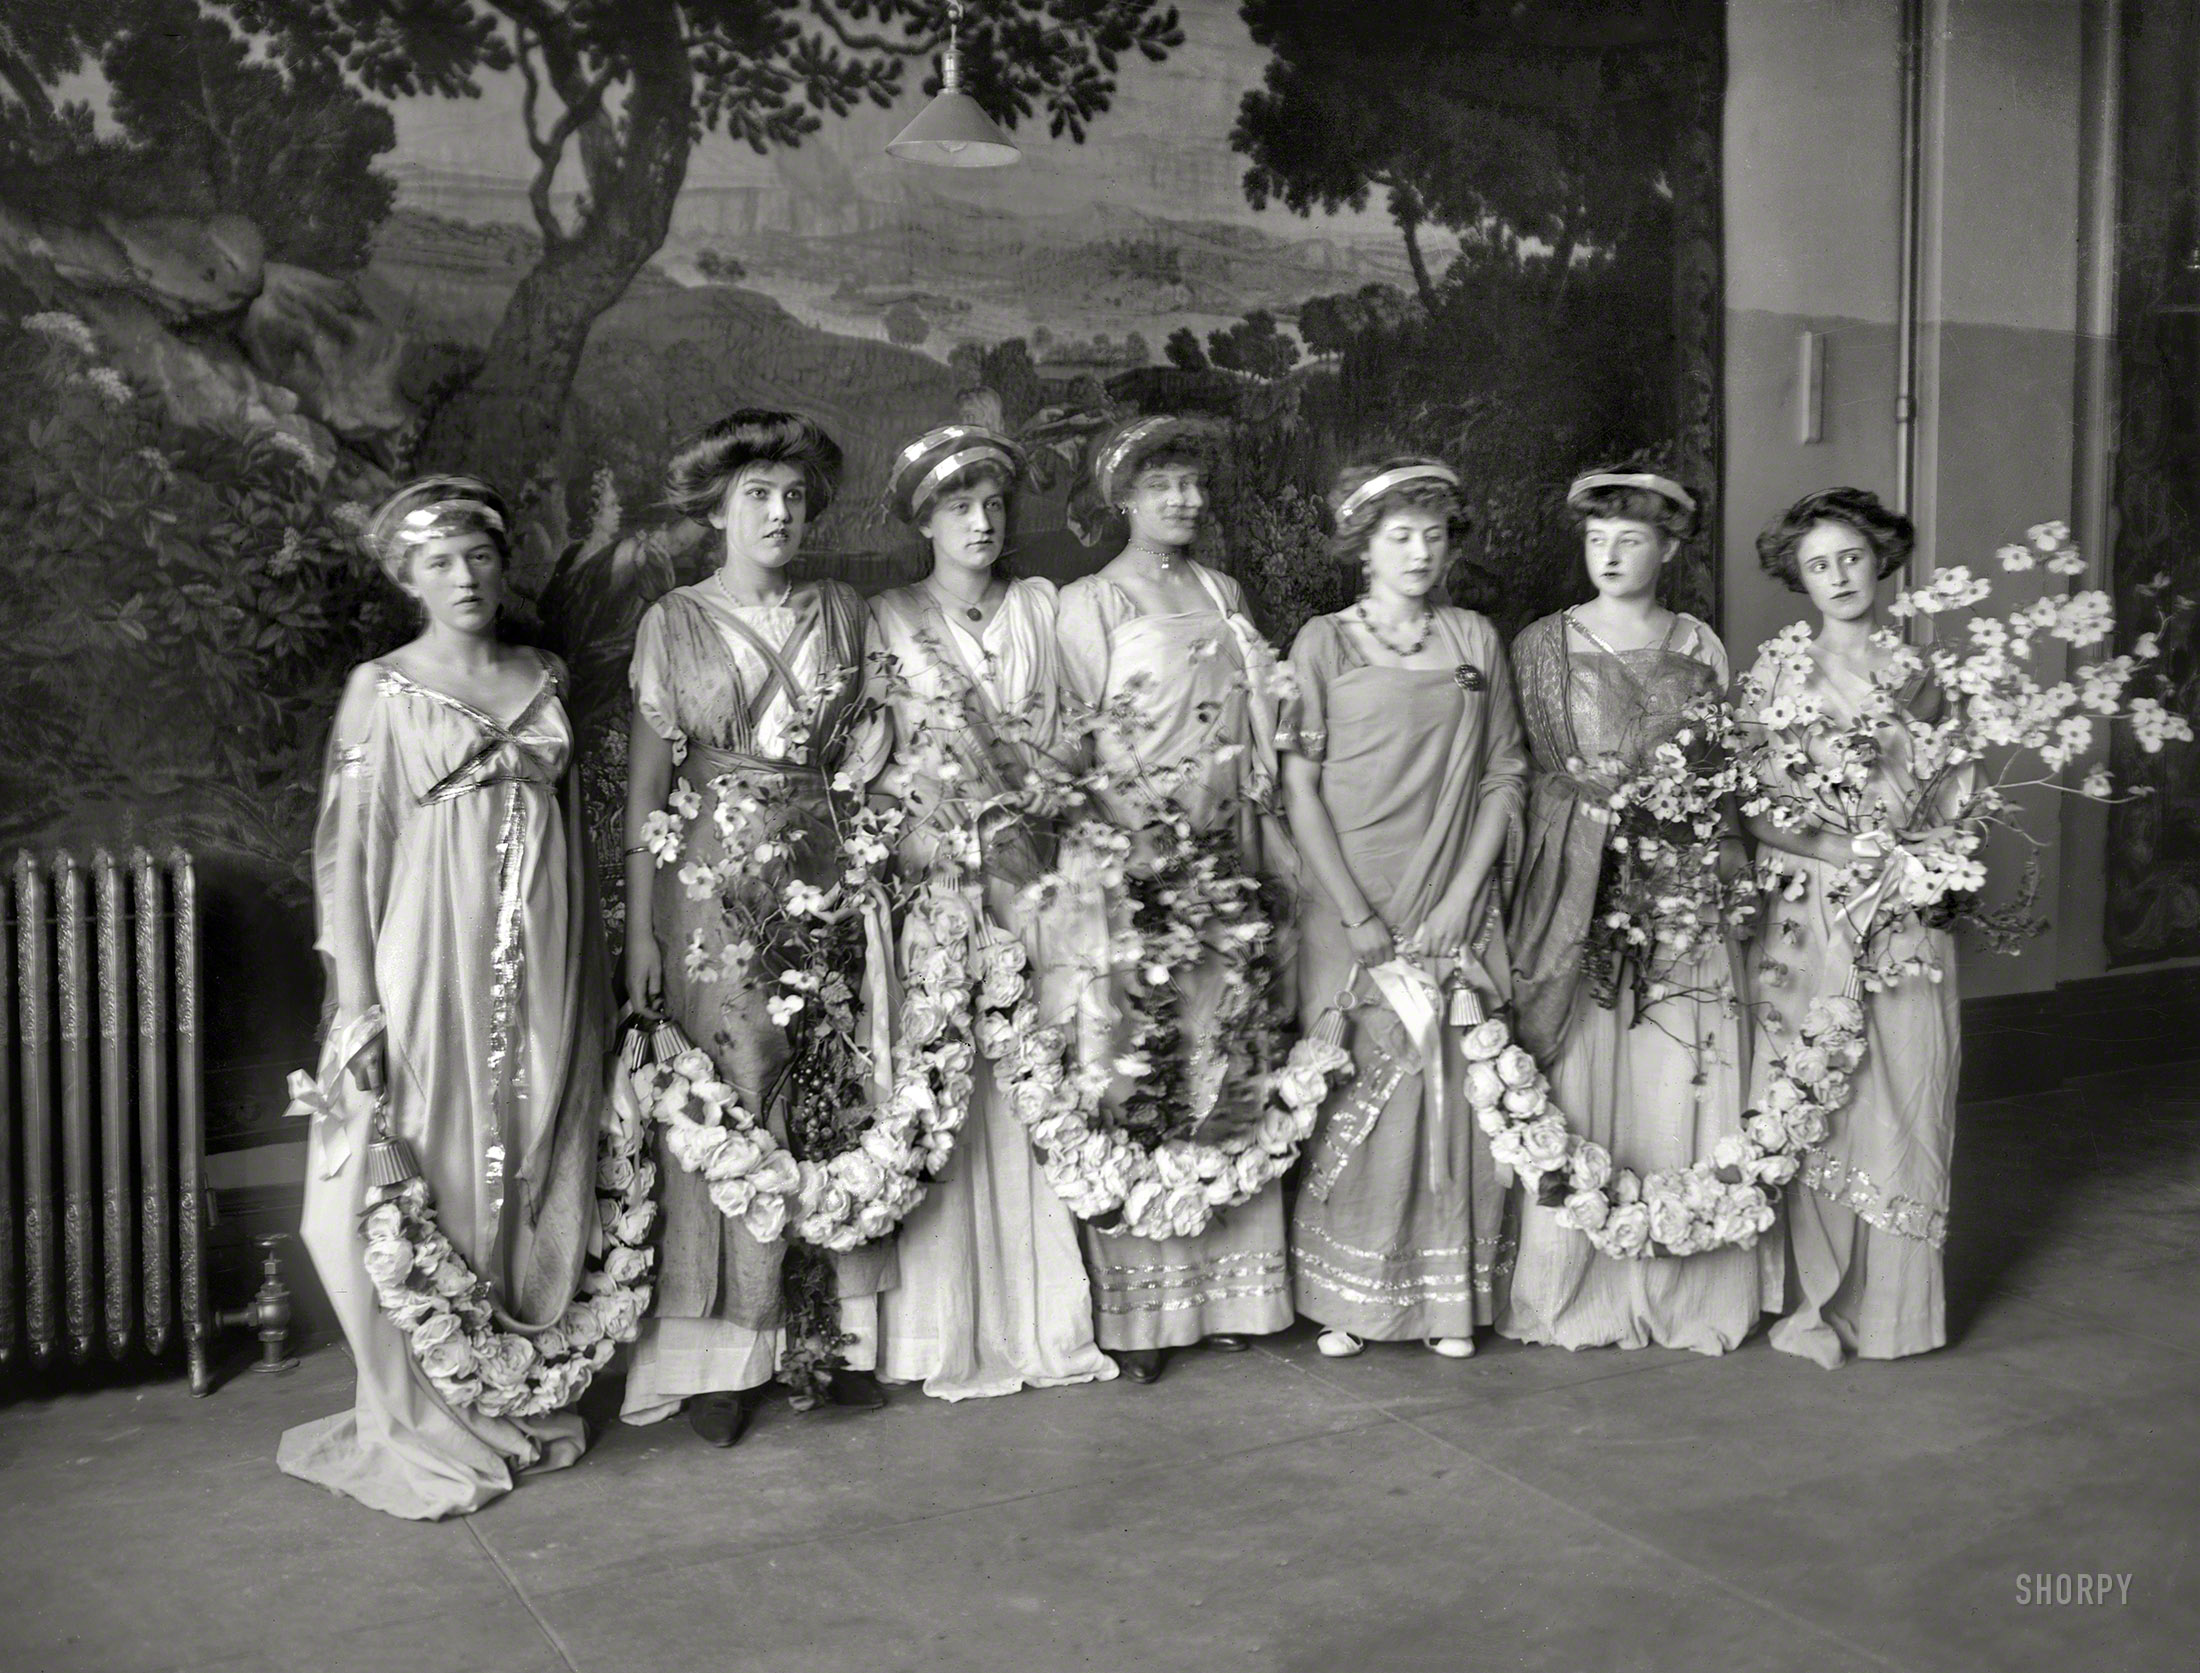 New York, 1909. "Greek Festival -- Gladys Mumford, Mary Meyers, Susan Dresser, Elise Holmes, Mary French, Alice Richard, Gladys Robbins." The theme here is classical antiquity, although Miss Holmes betrays a certain Cubist insouciance. 8x10 glass negative, Bain News Service. View full size.